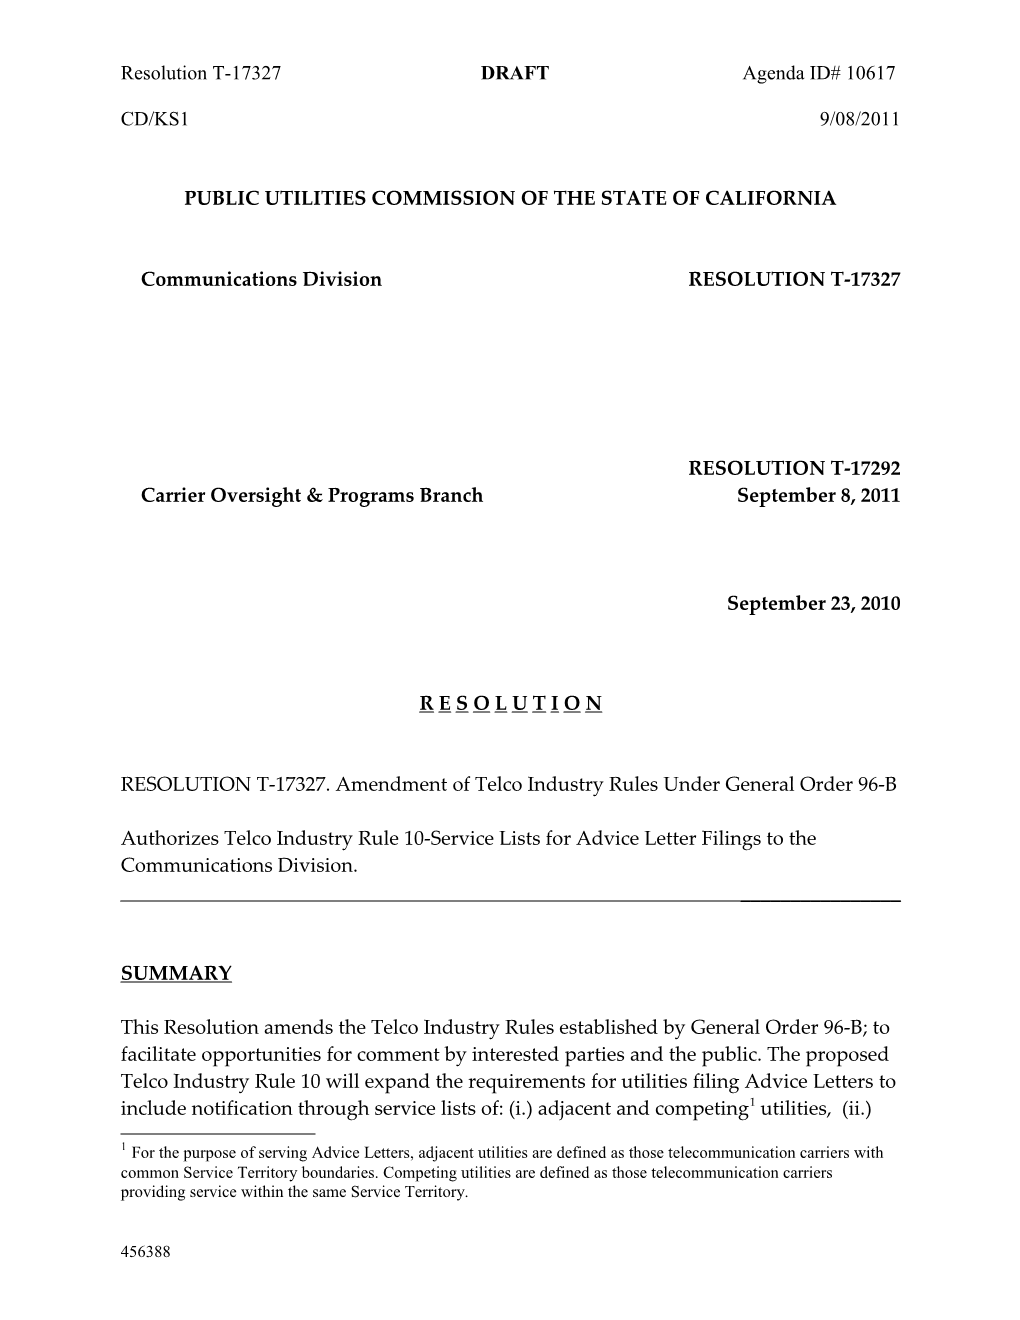 Public Utilities Commission of the State of California s117